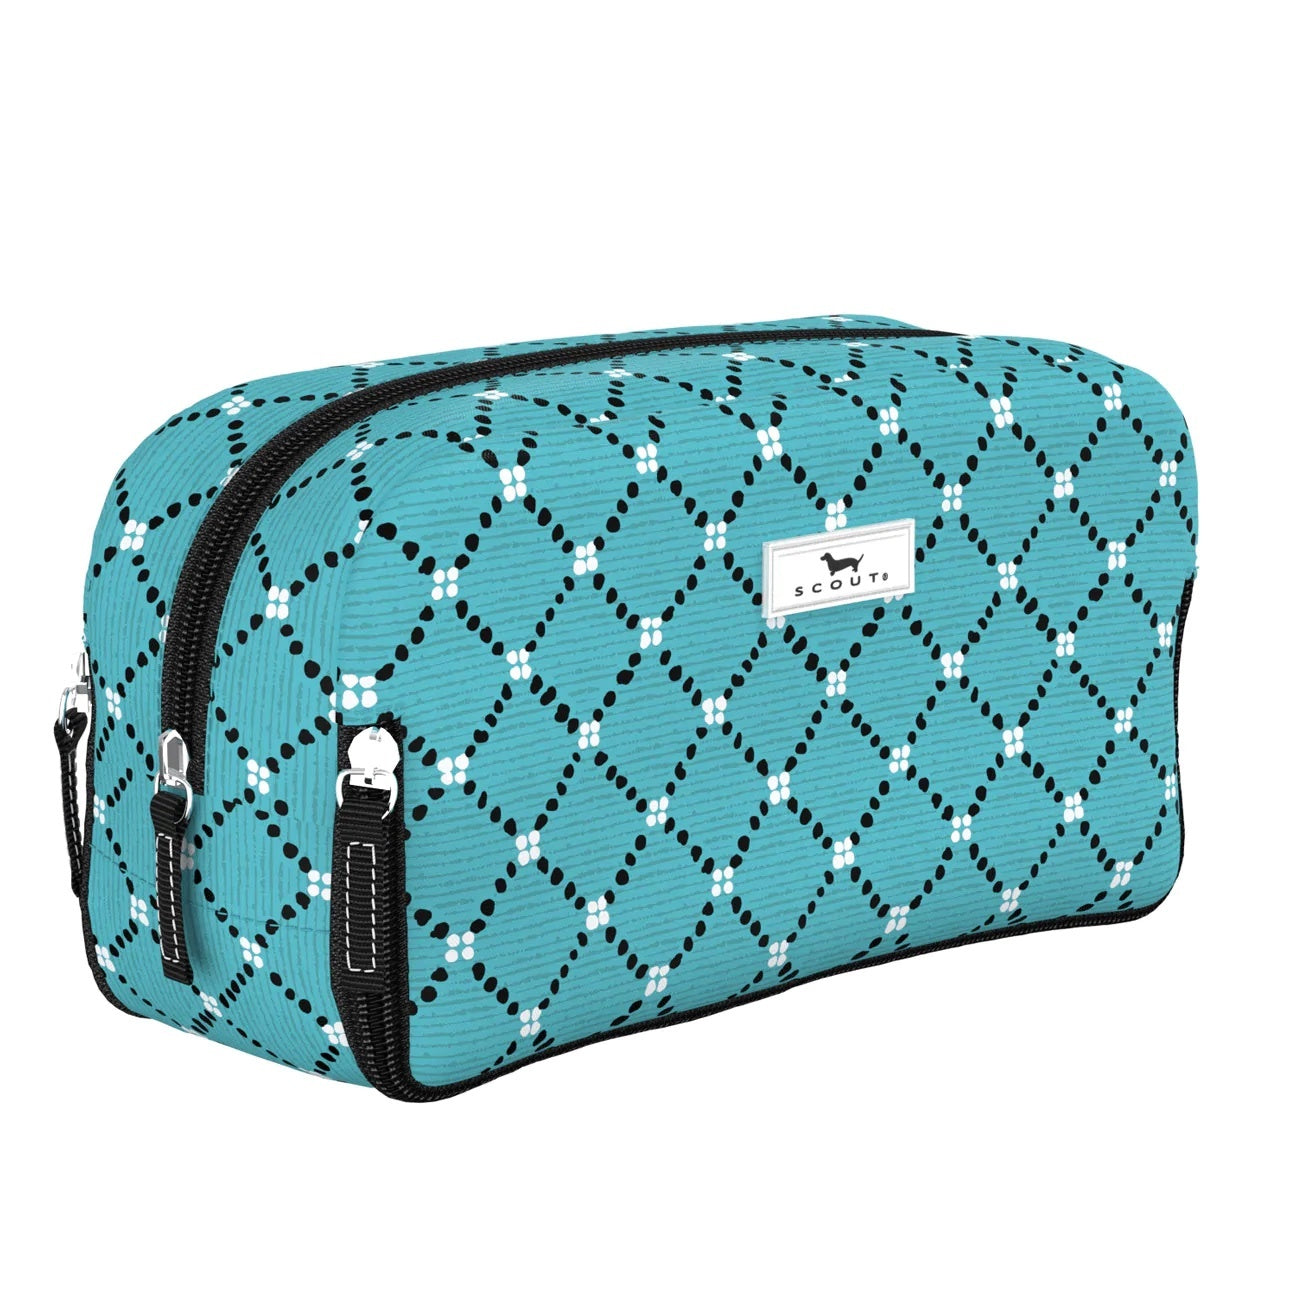 Scout 3-Way Bag Travel Accessories in Stitch Please at Wrapsody